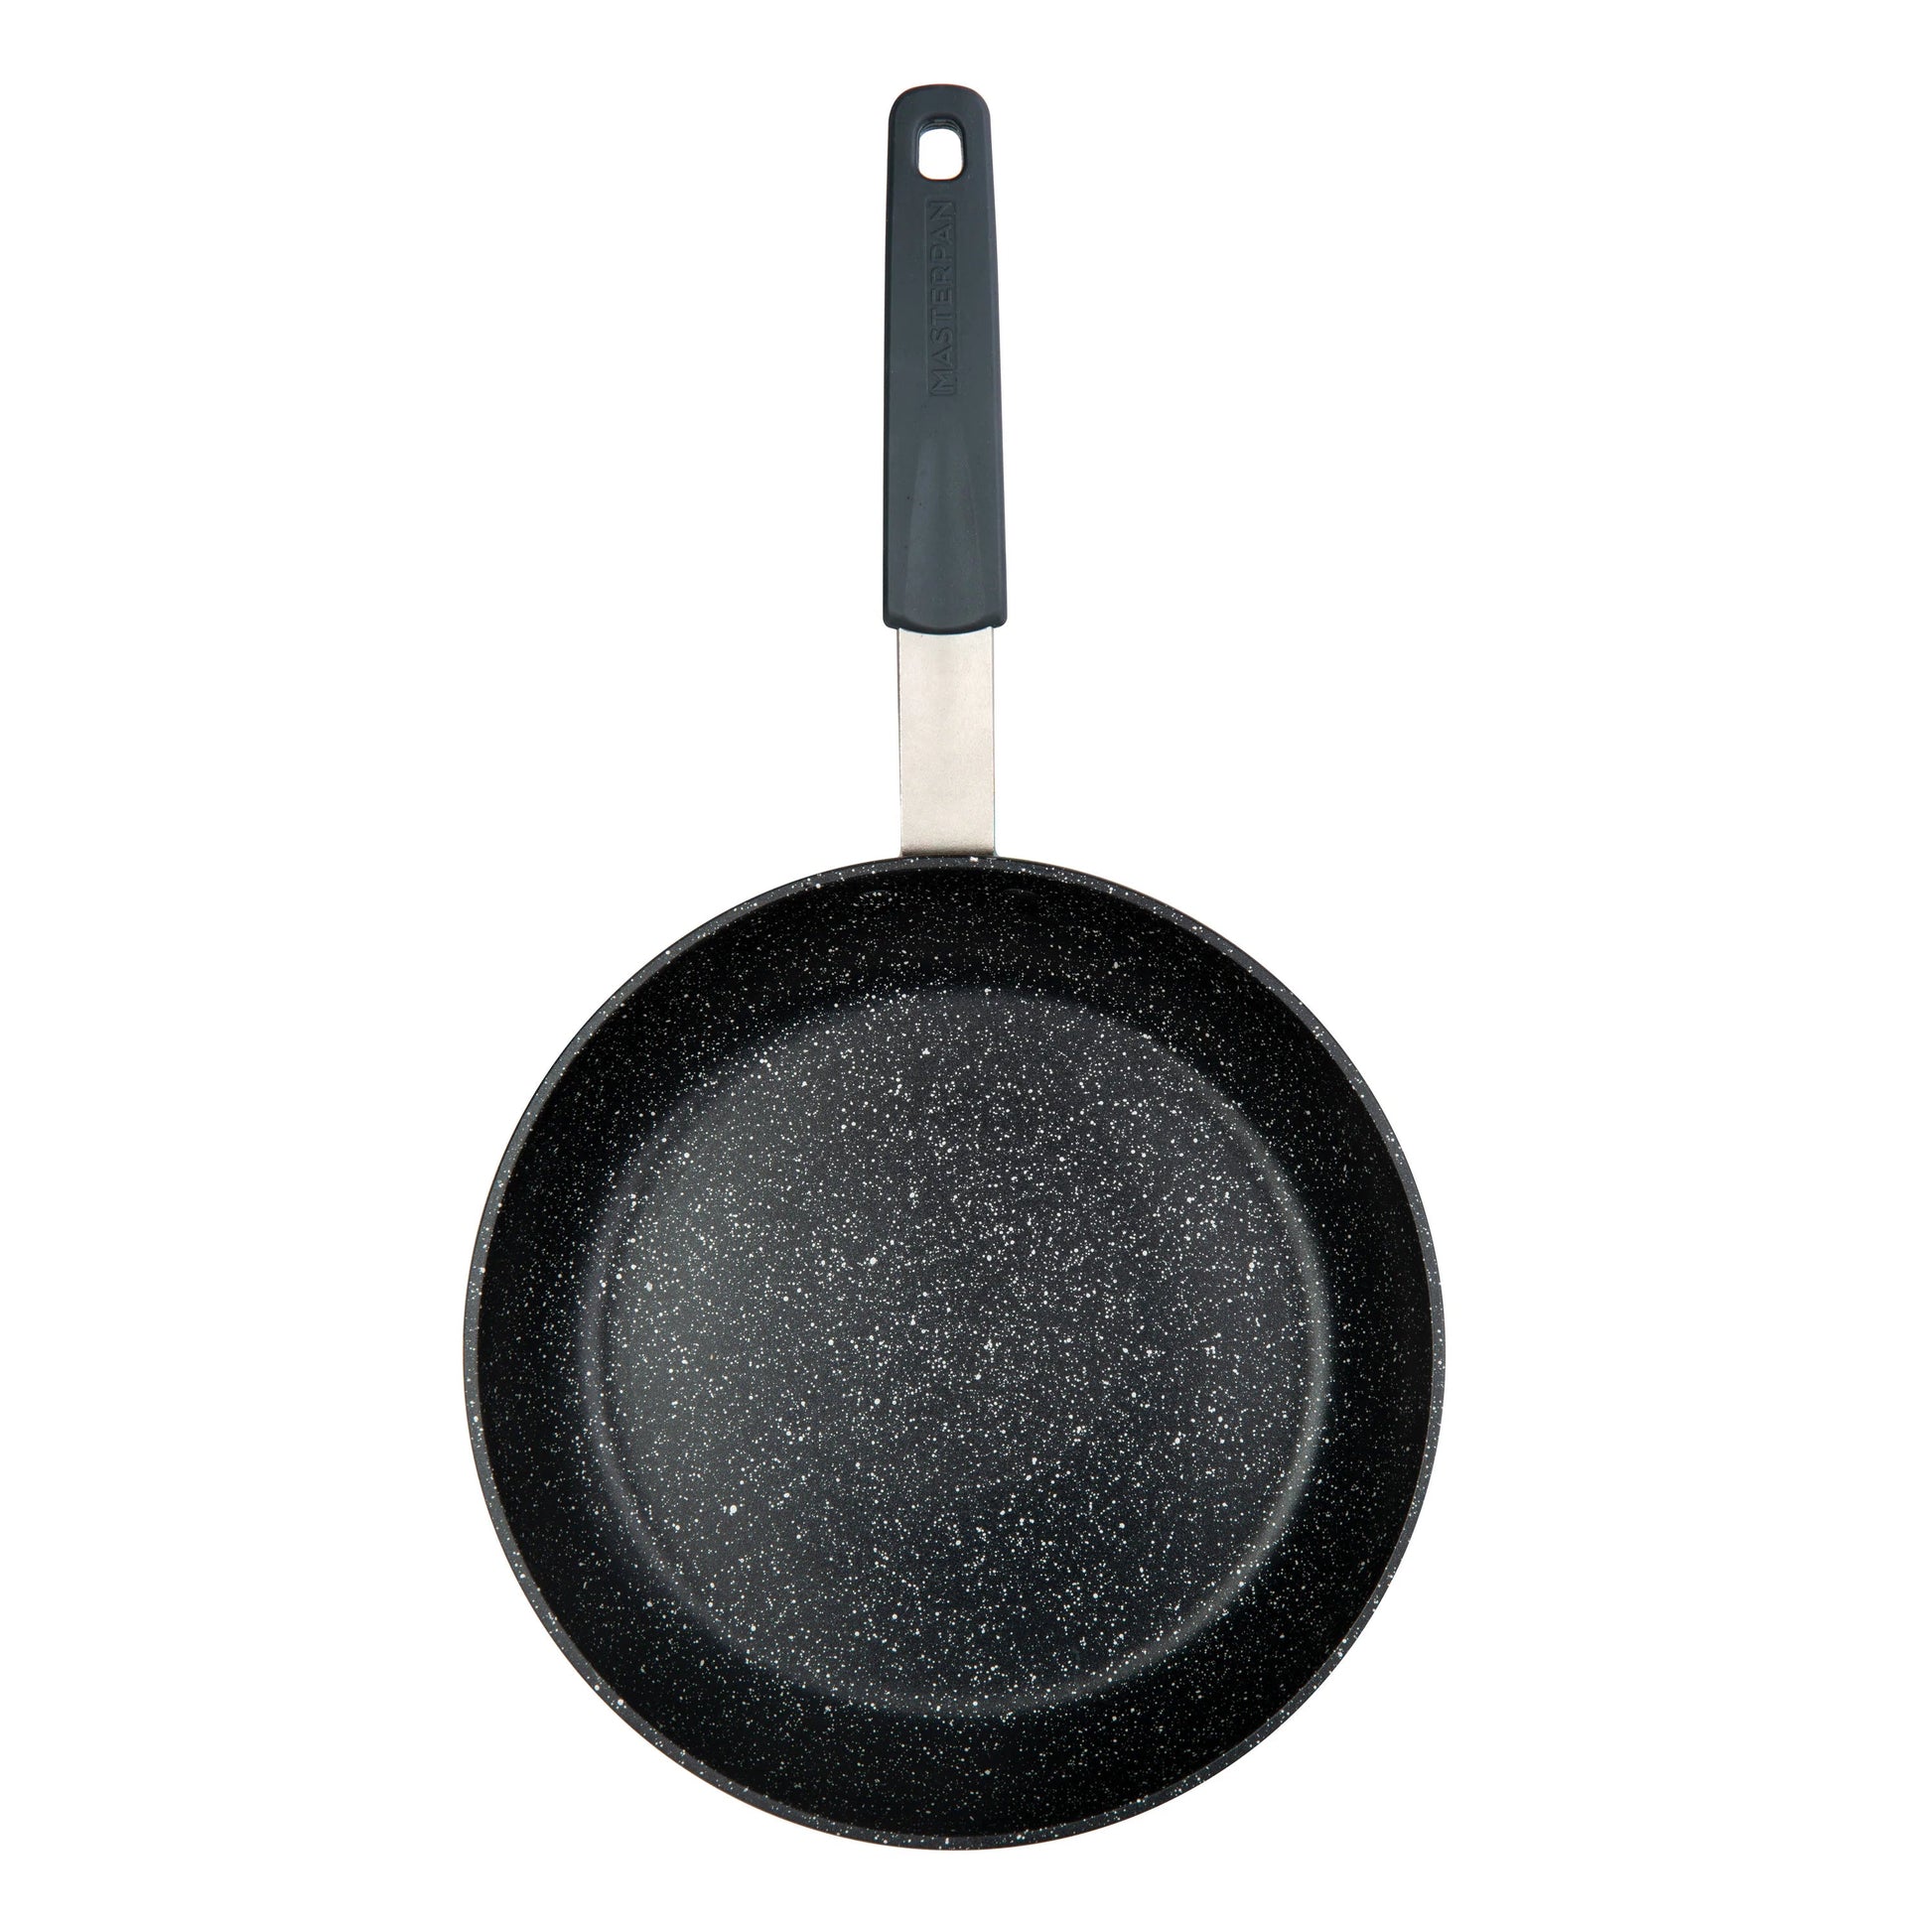 https://kitchenoasis.com/cdn/shop/files/MASTERPAN-Chefs-Series-11-4-Layer-Ceramic-Re-Enforced-Non-Stick-Cast-Aluminum-Frying-Pan-and-Skillet-With-Riveted-Stainless-Steel-Handle-and-Removable-Silicone-Handle-Cover-3.webp?v=1685839953&width=1946